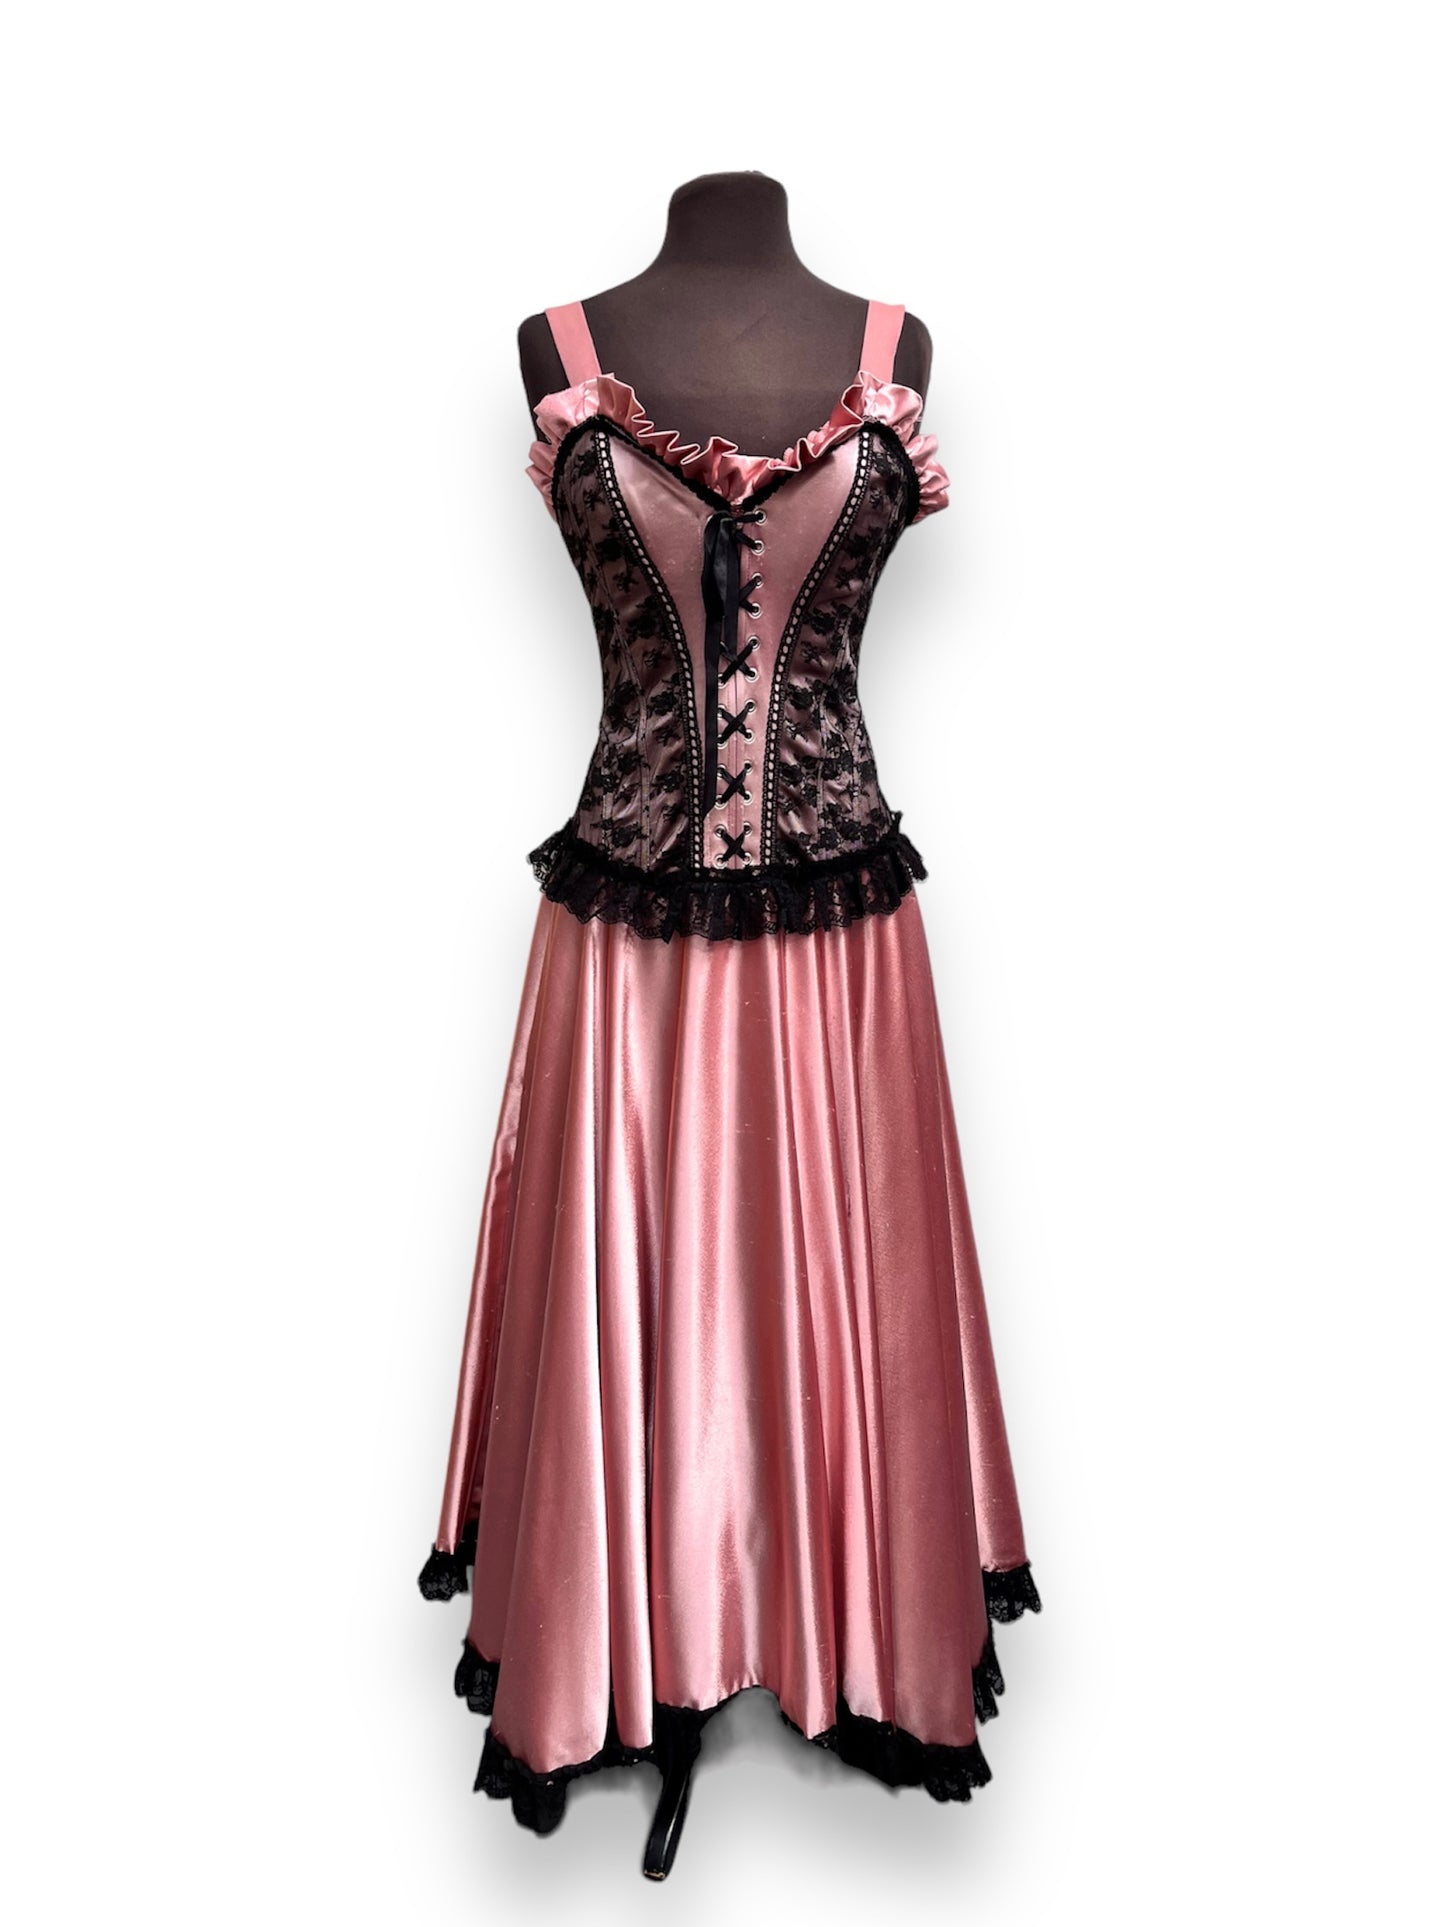 Stunning Pink Show Girl Saloon Girl Dress Size 8-10 Ex Hire Moulin Rouge